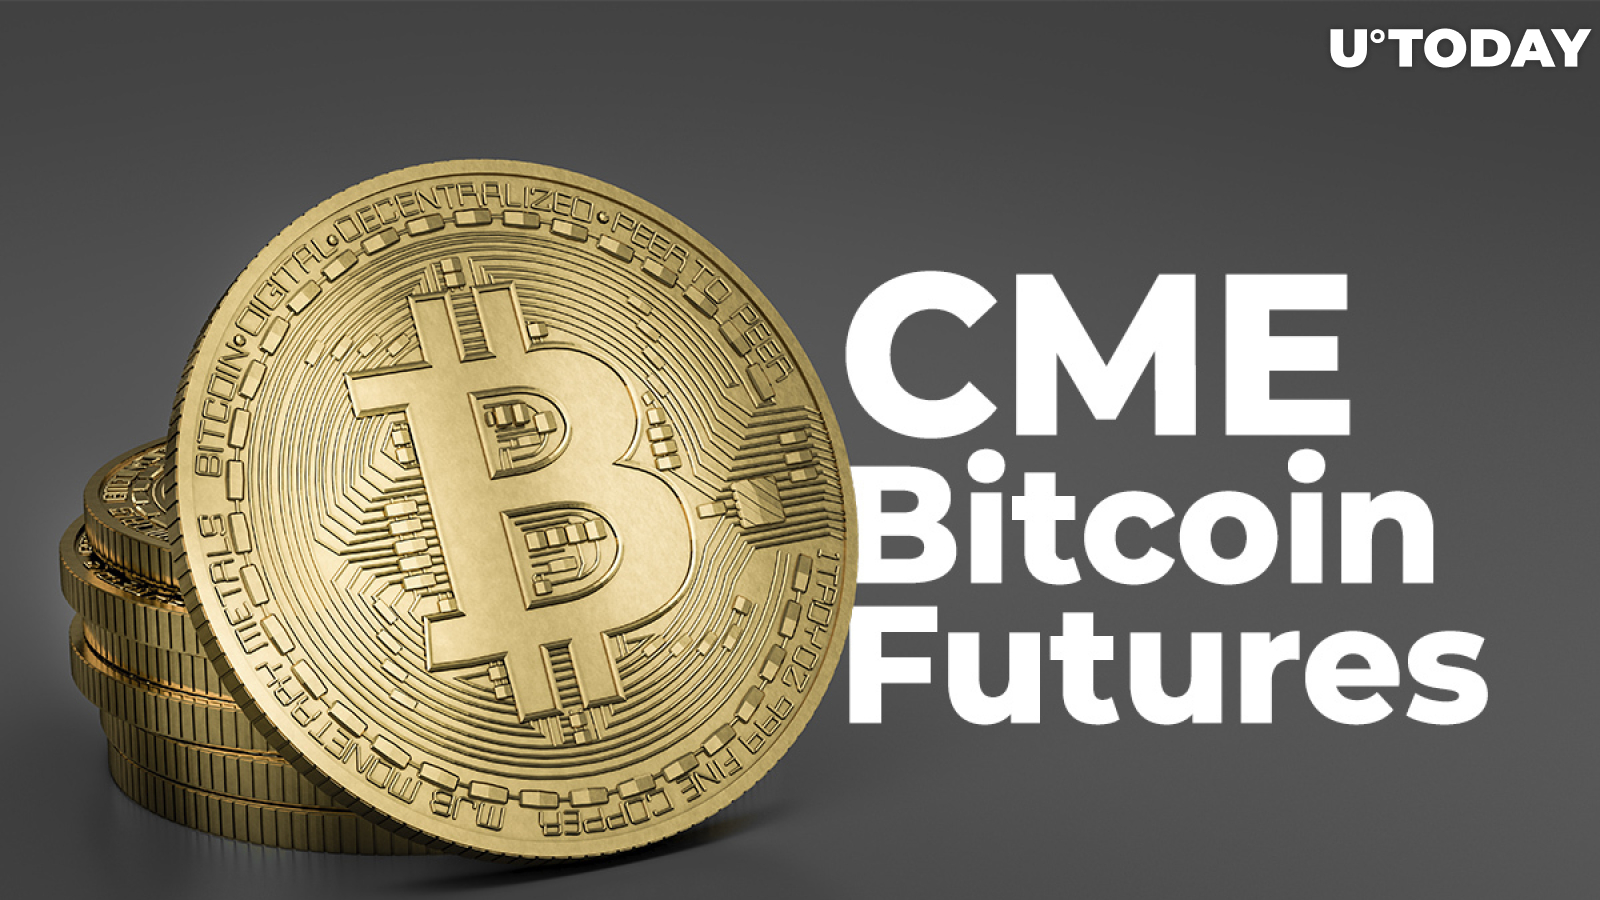 Cme bitcoin options interactive brokers